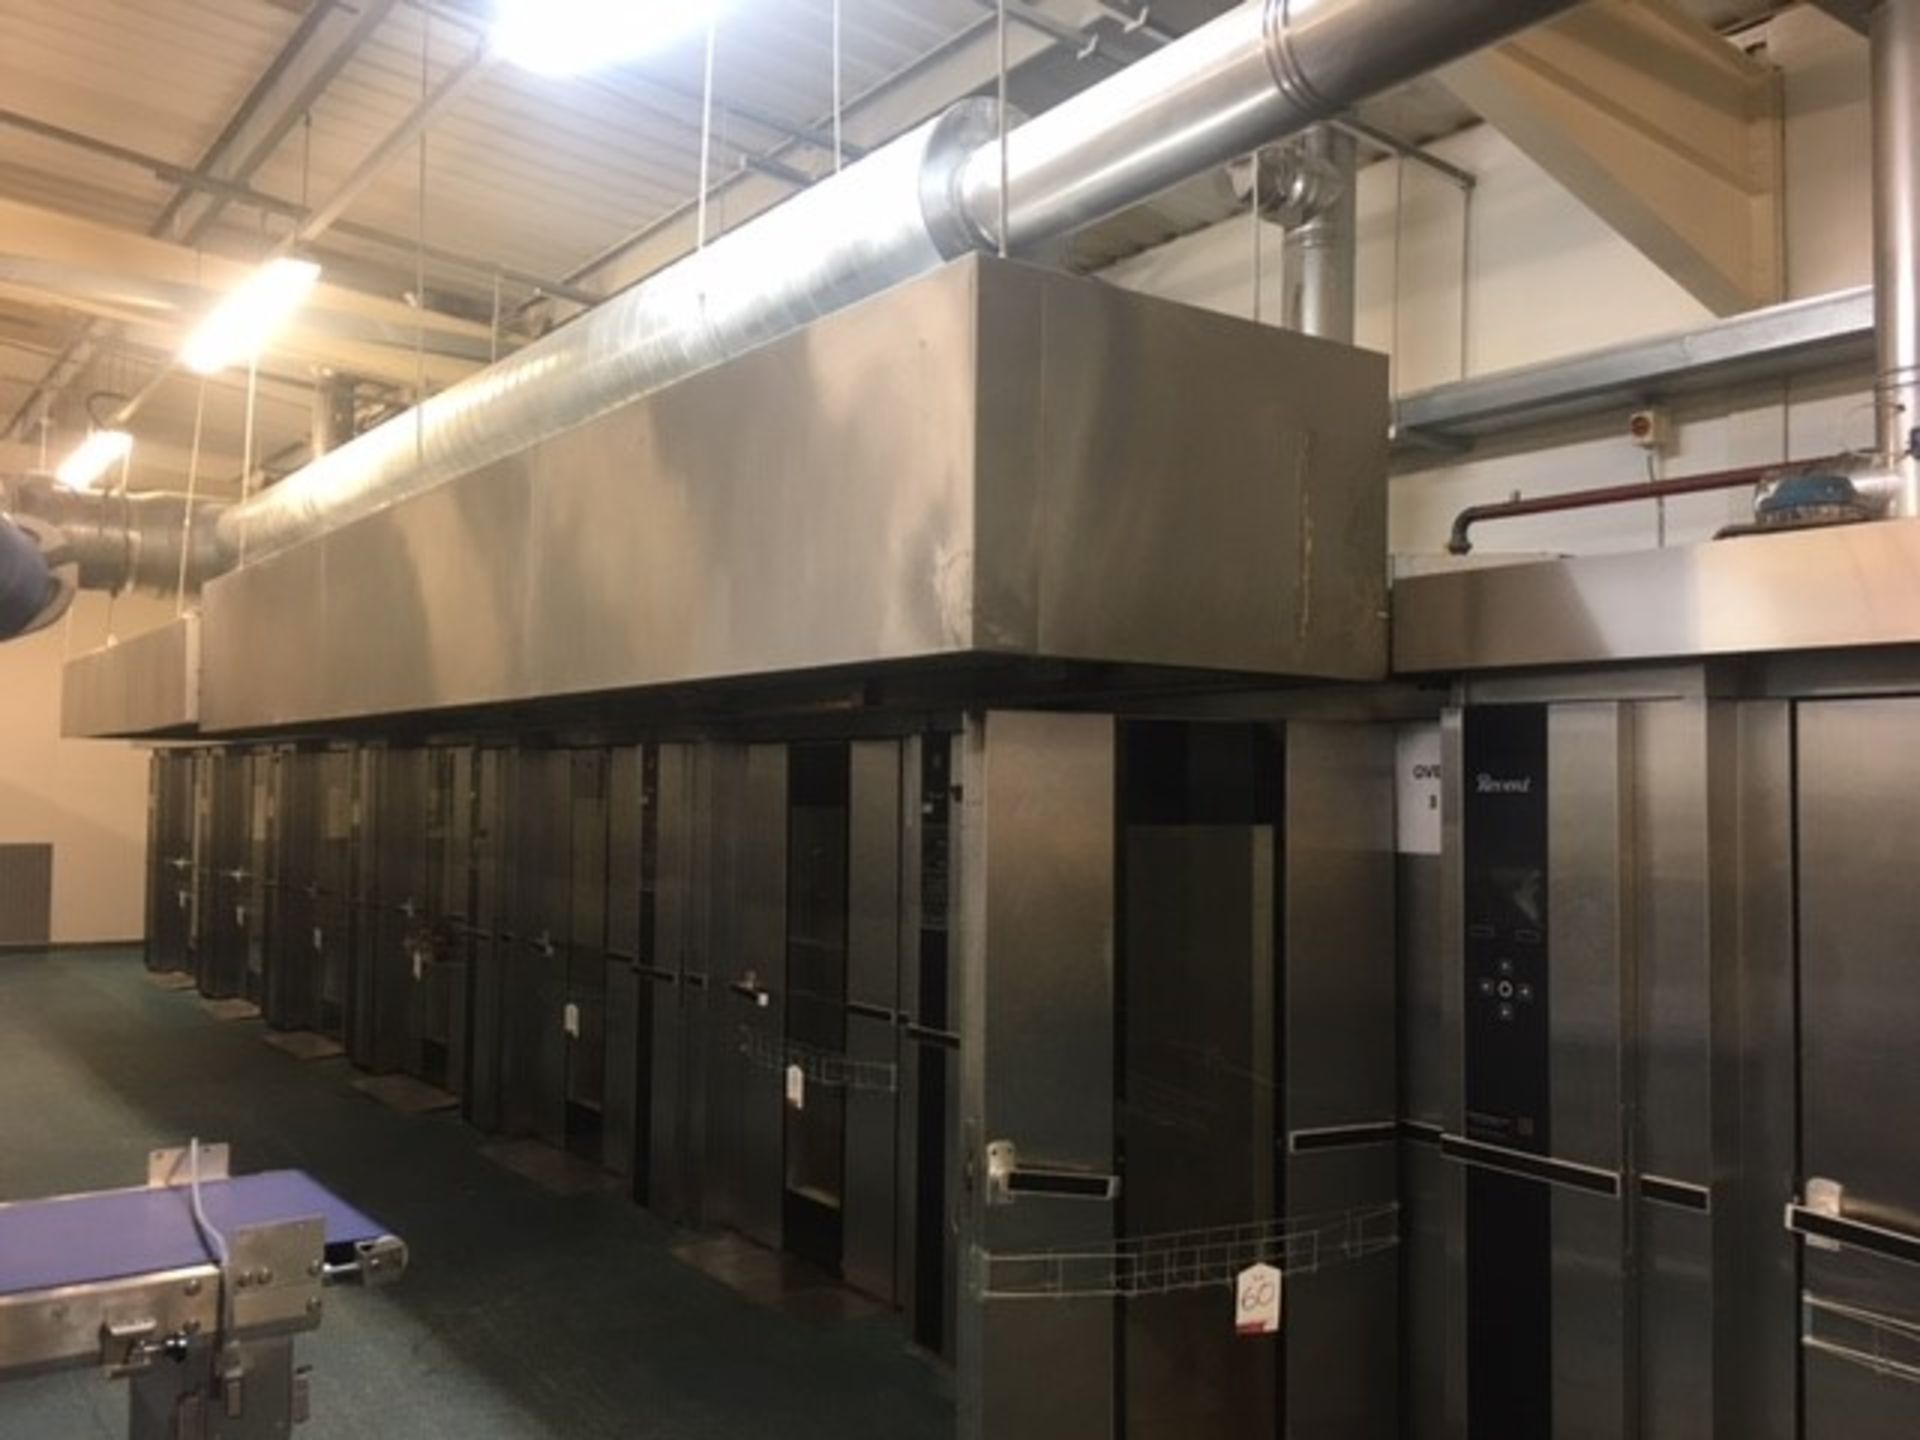 Stainless Steel Extraction Canopy